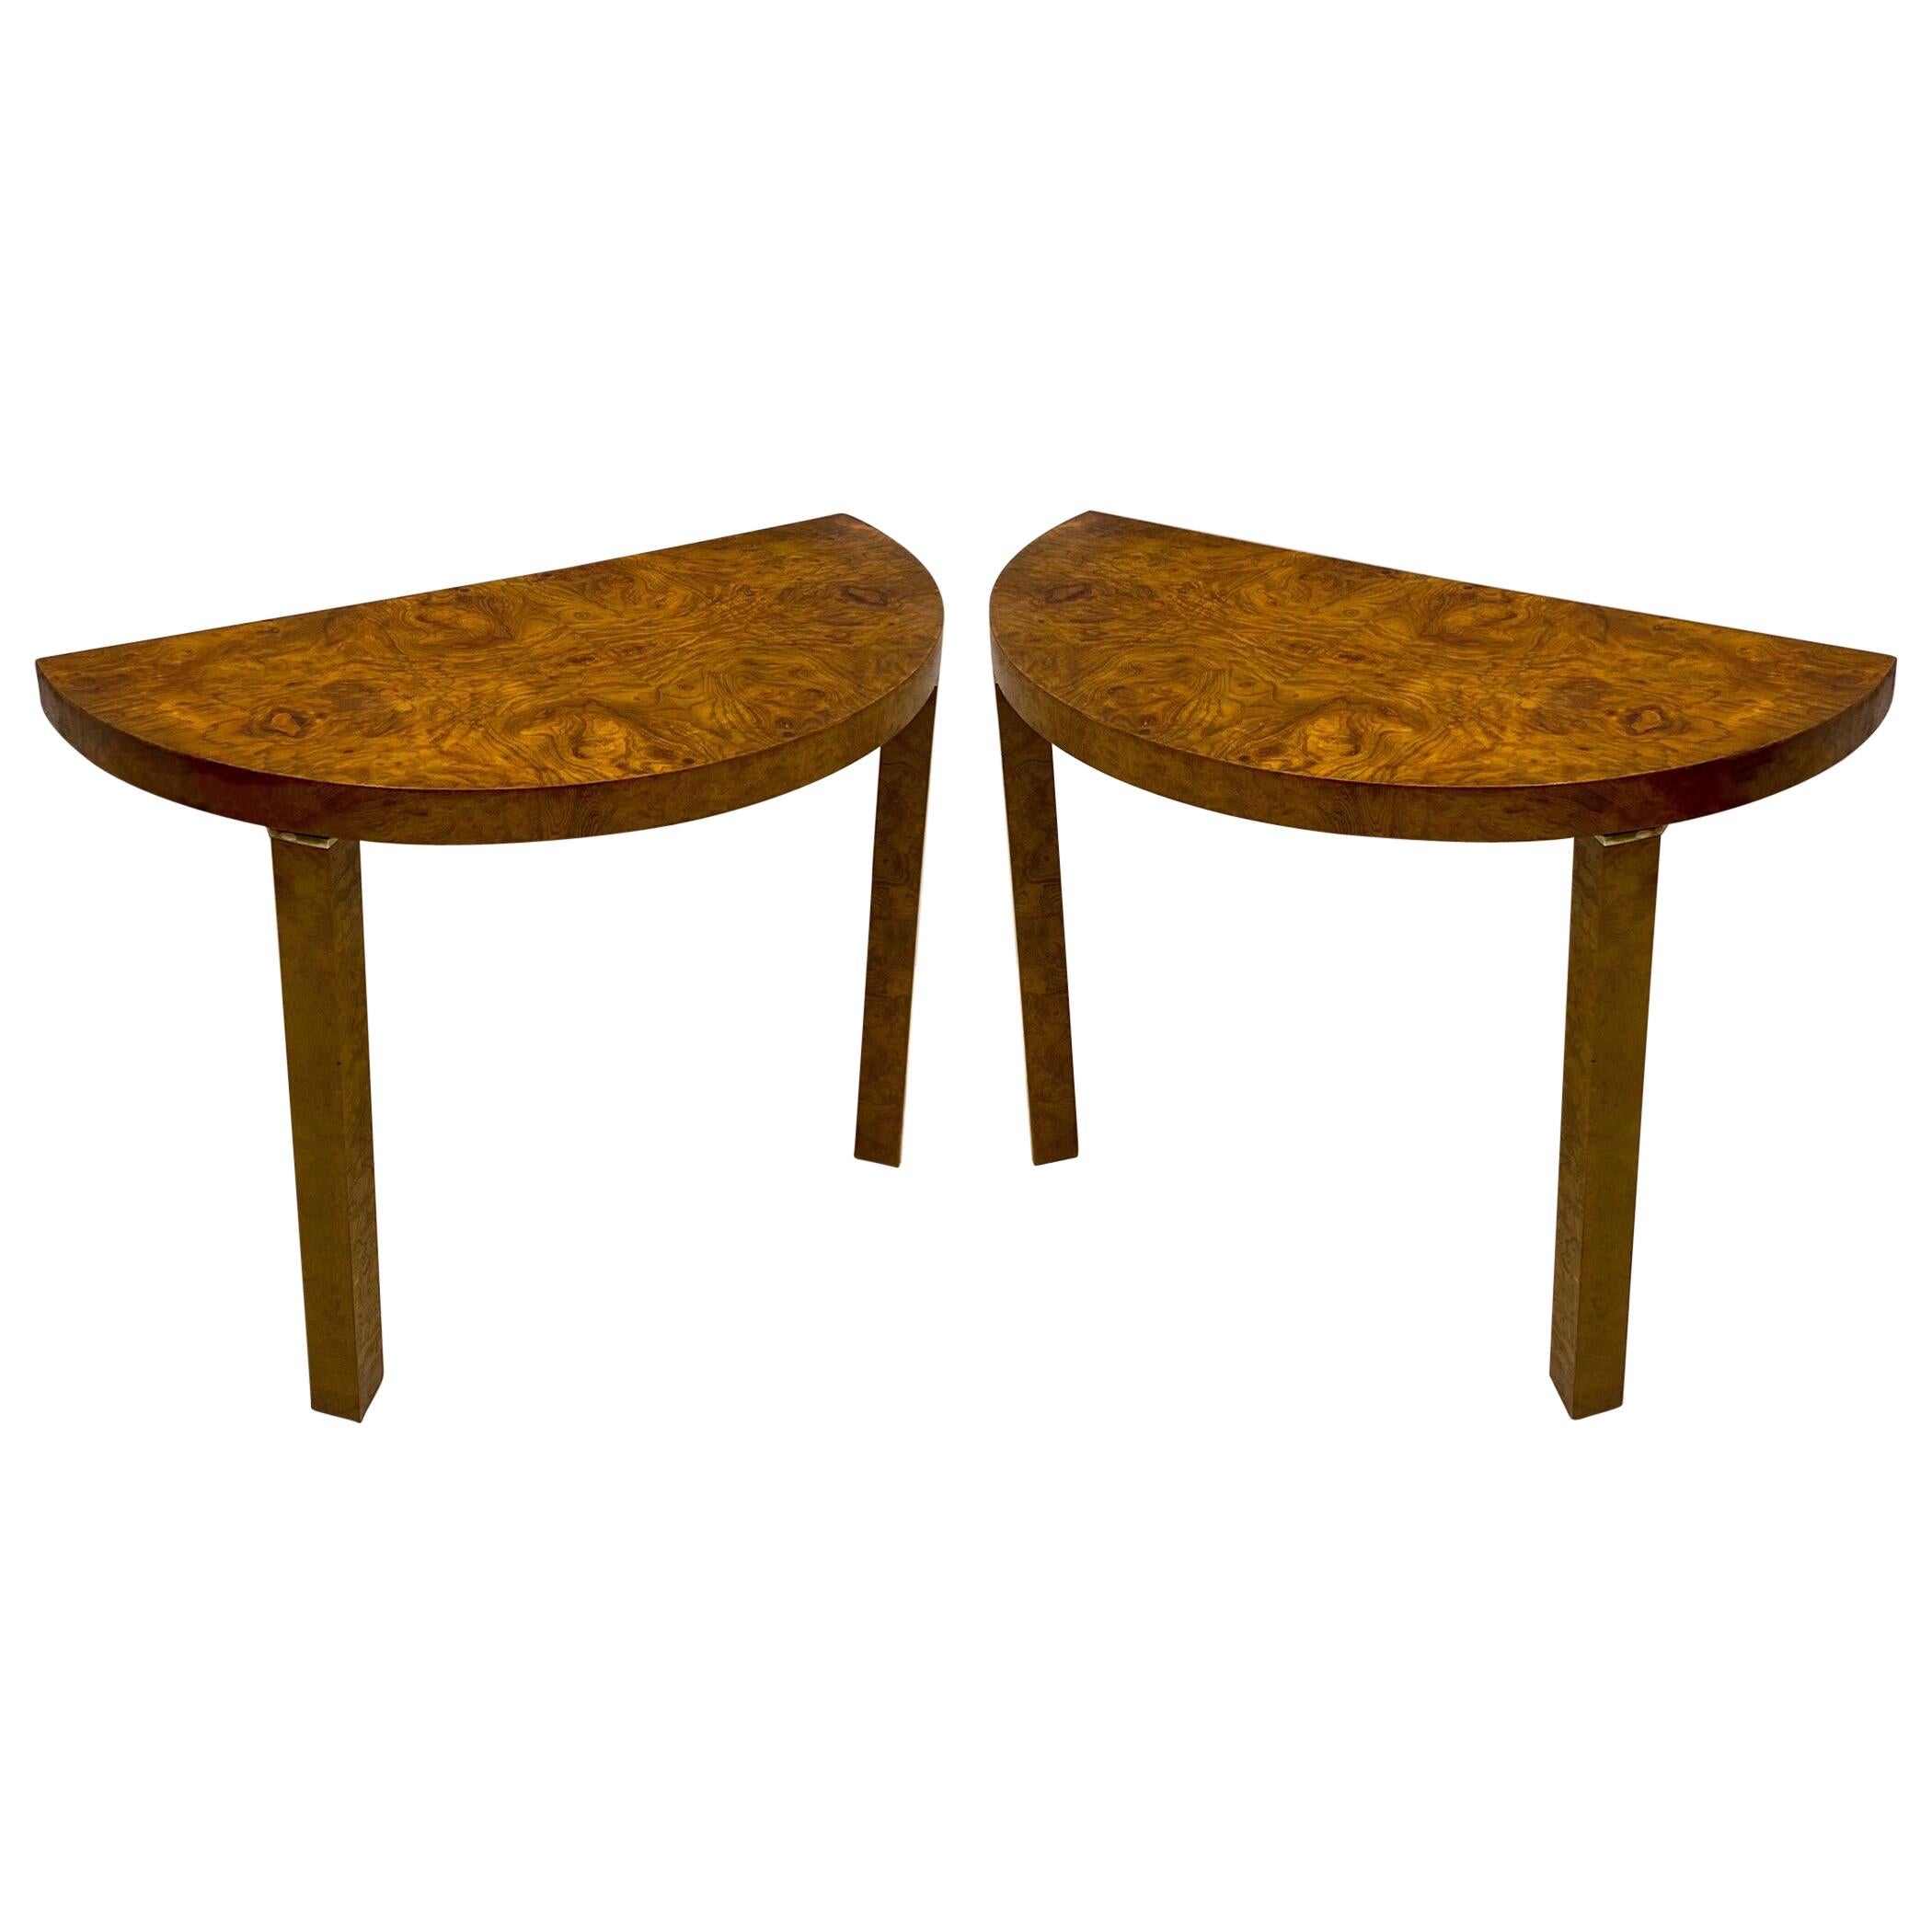 1970s Modern Milo Baughman Style Burl and Brass Console Tables, a Pair